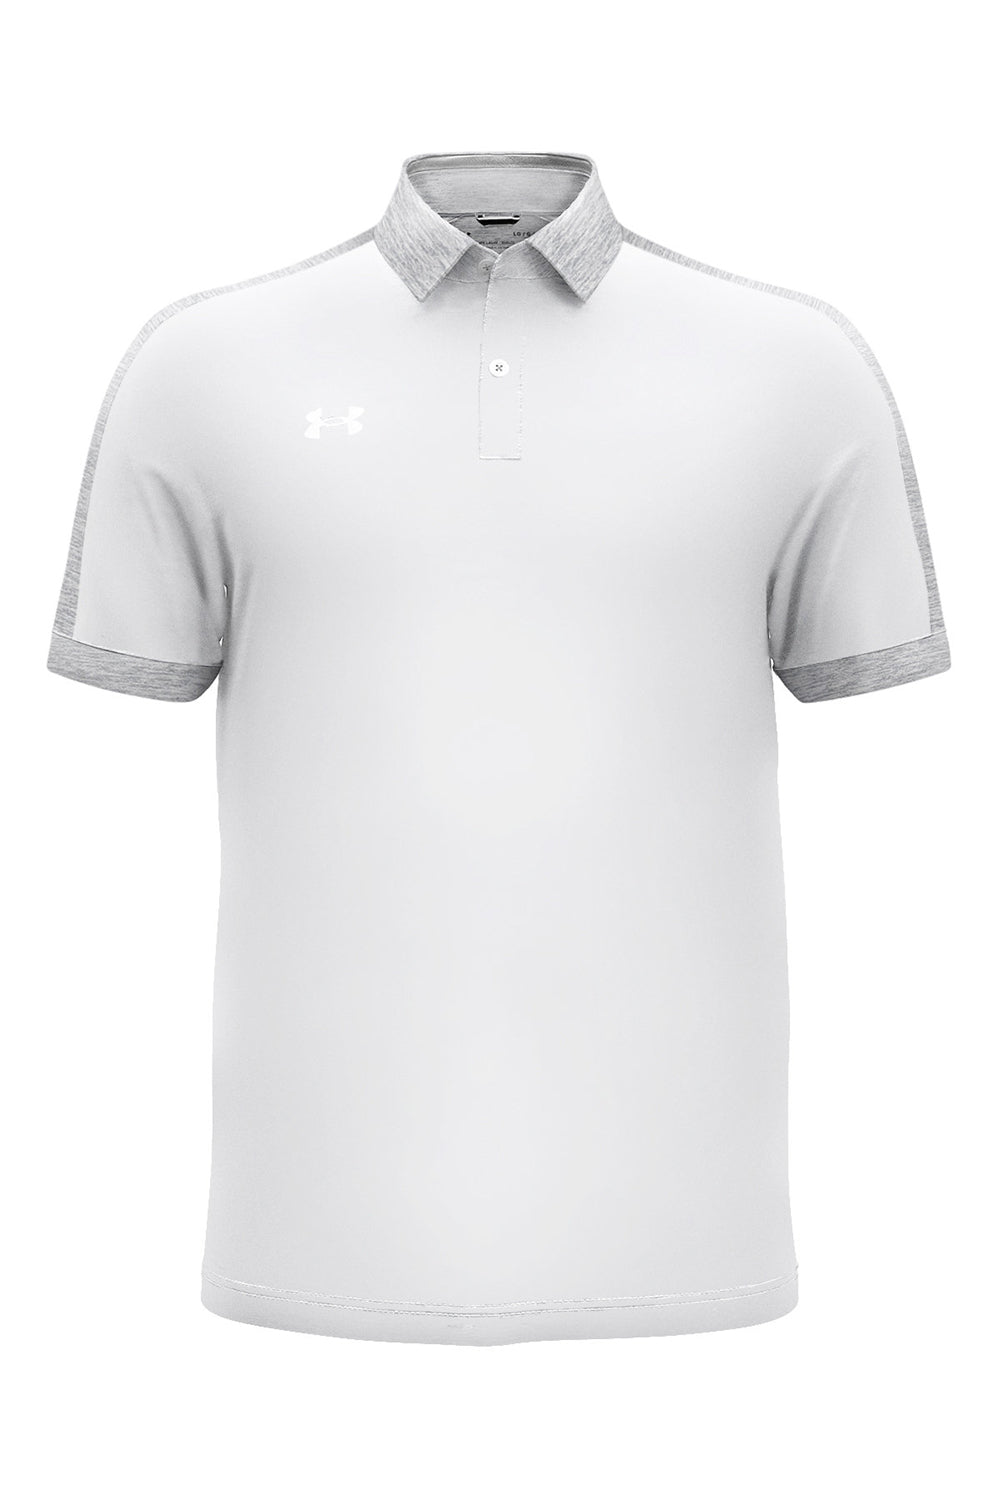 Under Armour 1376907 Mens Trophy Level Moisture Wicking Short Sleeve Polo Shirt White/Mod Grey Flat Front